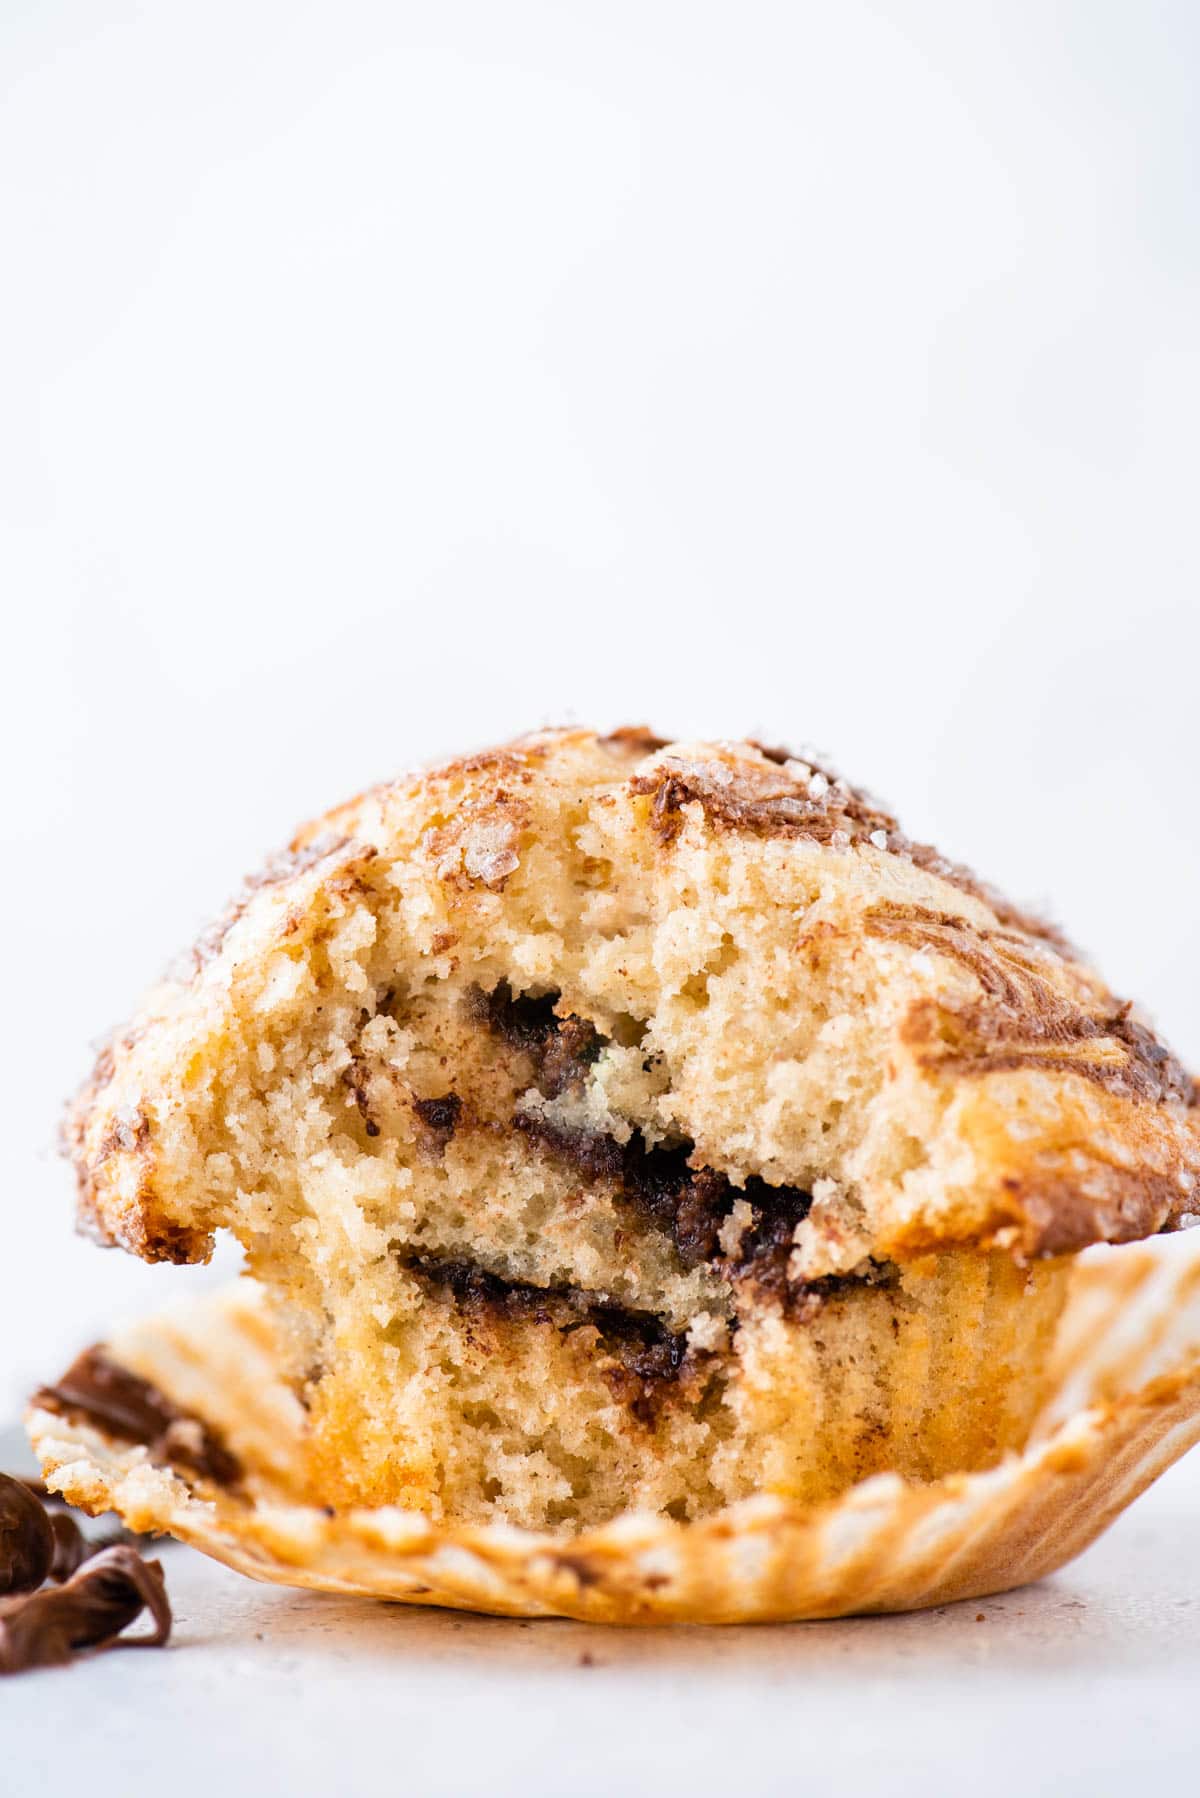 a nutella swirl muffin on top of an open muffin liner with a bite missing, exposing the nutella layers inside